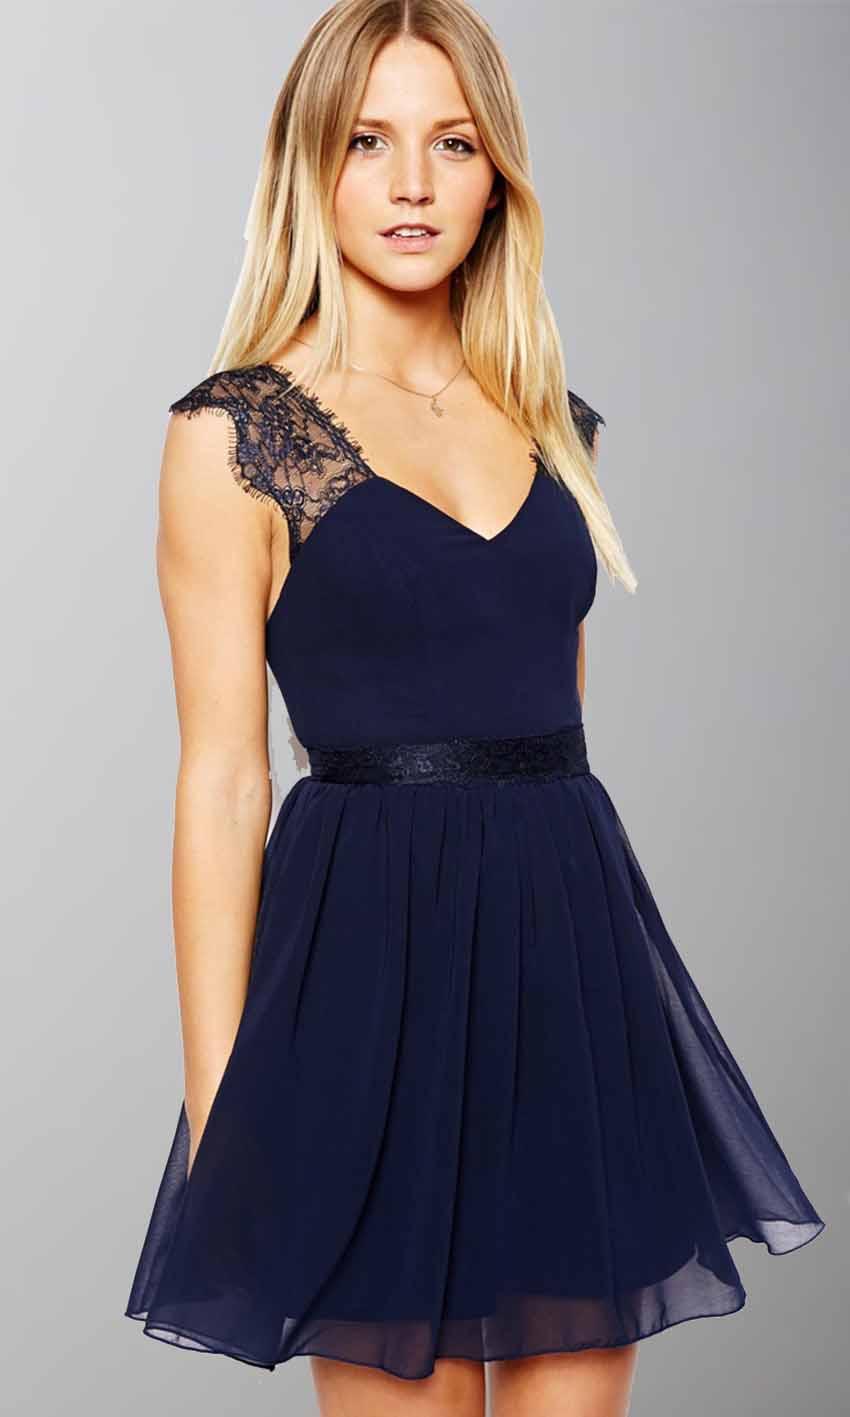 Mariage - Cute Lace Cap Sleeves V-neck Short Wedding party Dress KSP410 [KSP410] - £85.00 : Cheap Prom Dresses Uk, Bridesmaid Dresses, 2014 Prom & Evening Dresses, Look for cheap elegant prom dresses 2014, cocktail gowns, or dresses for special occasions? kissprom.